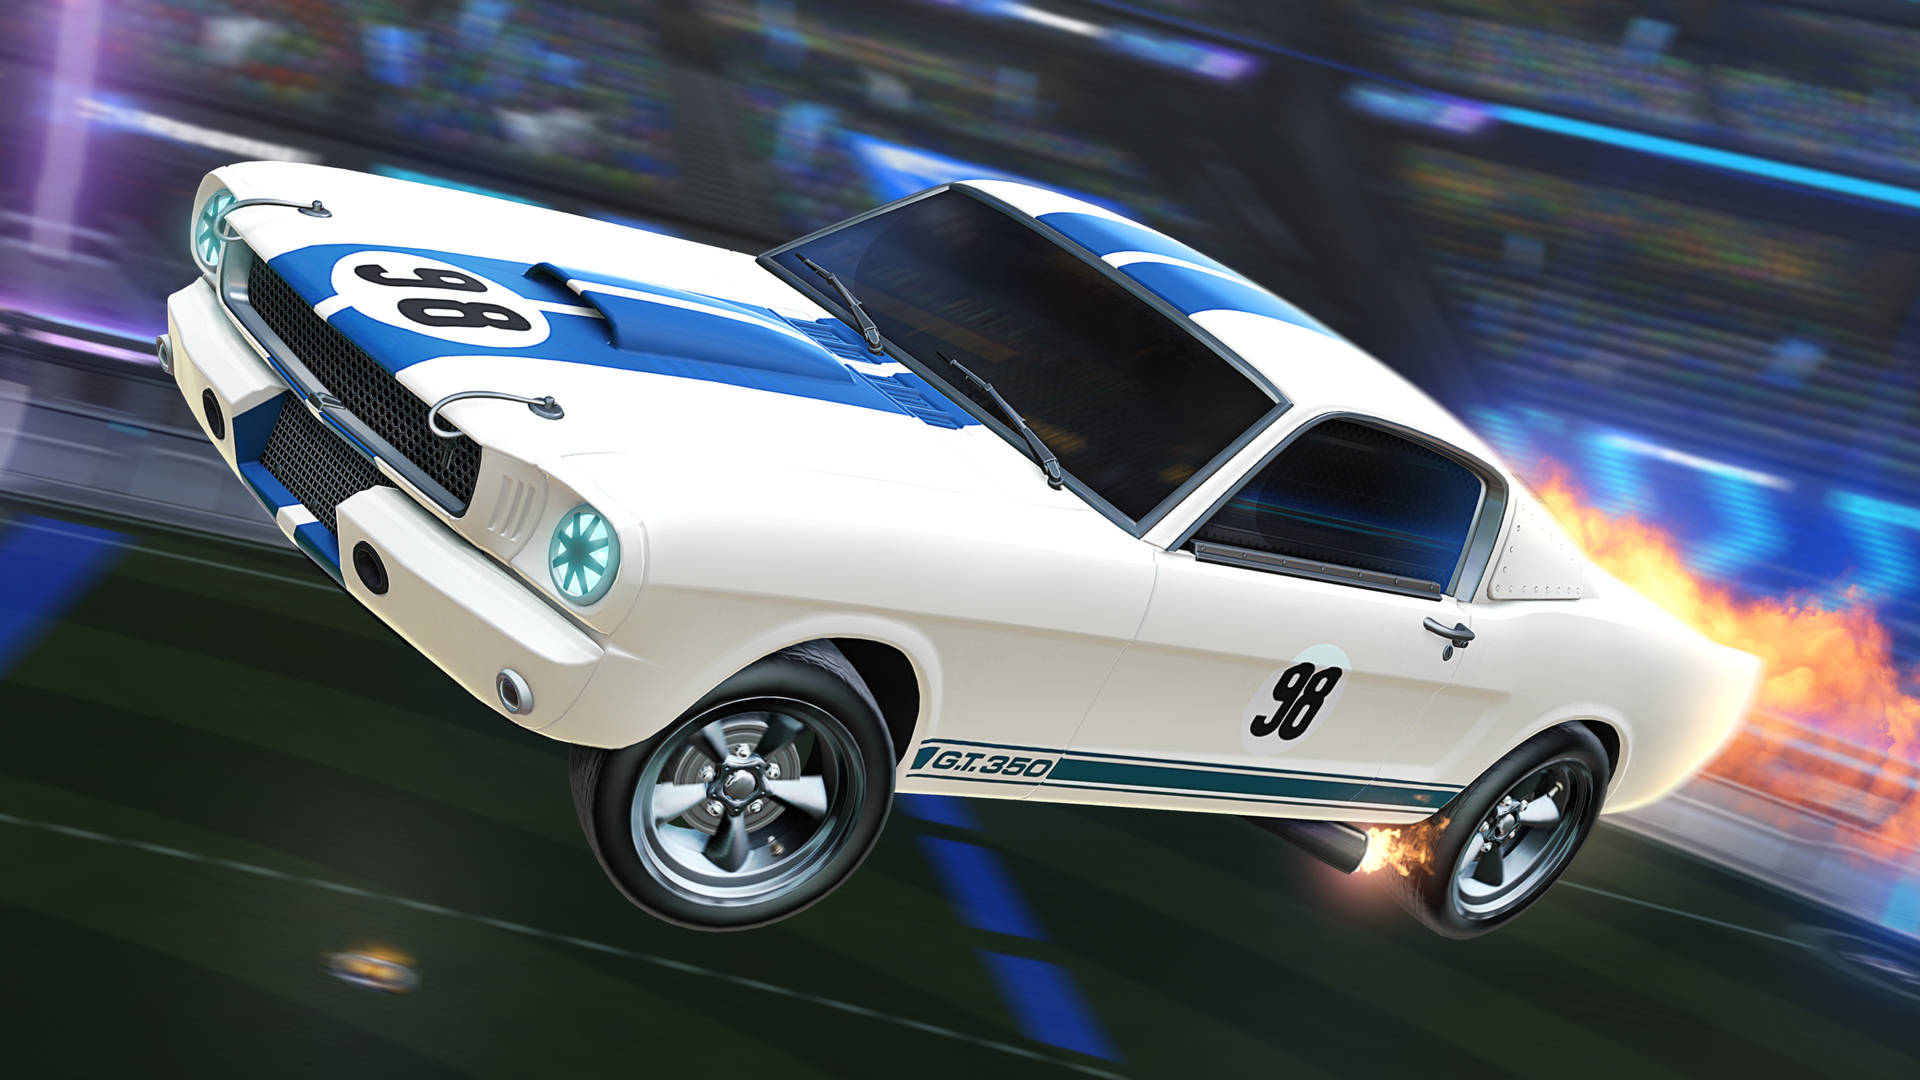 4k Rocket League Shelby Mustang Background